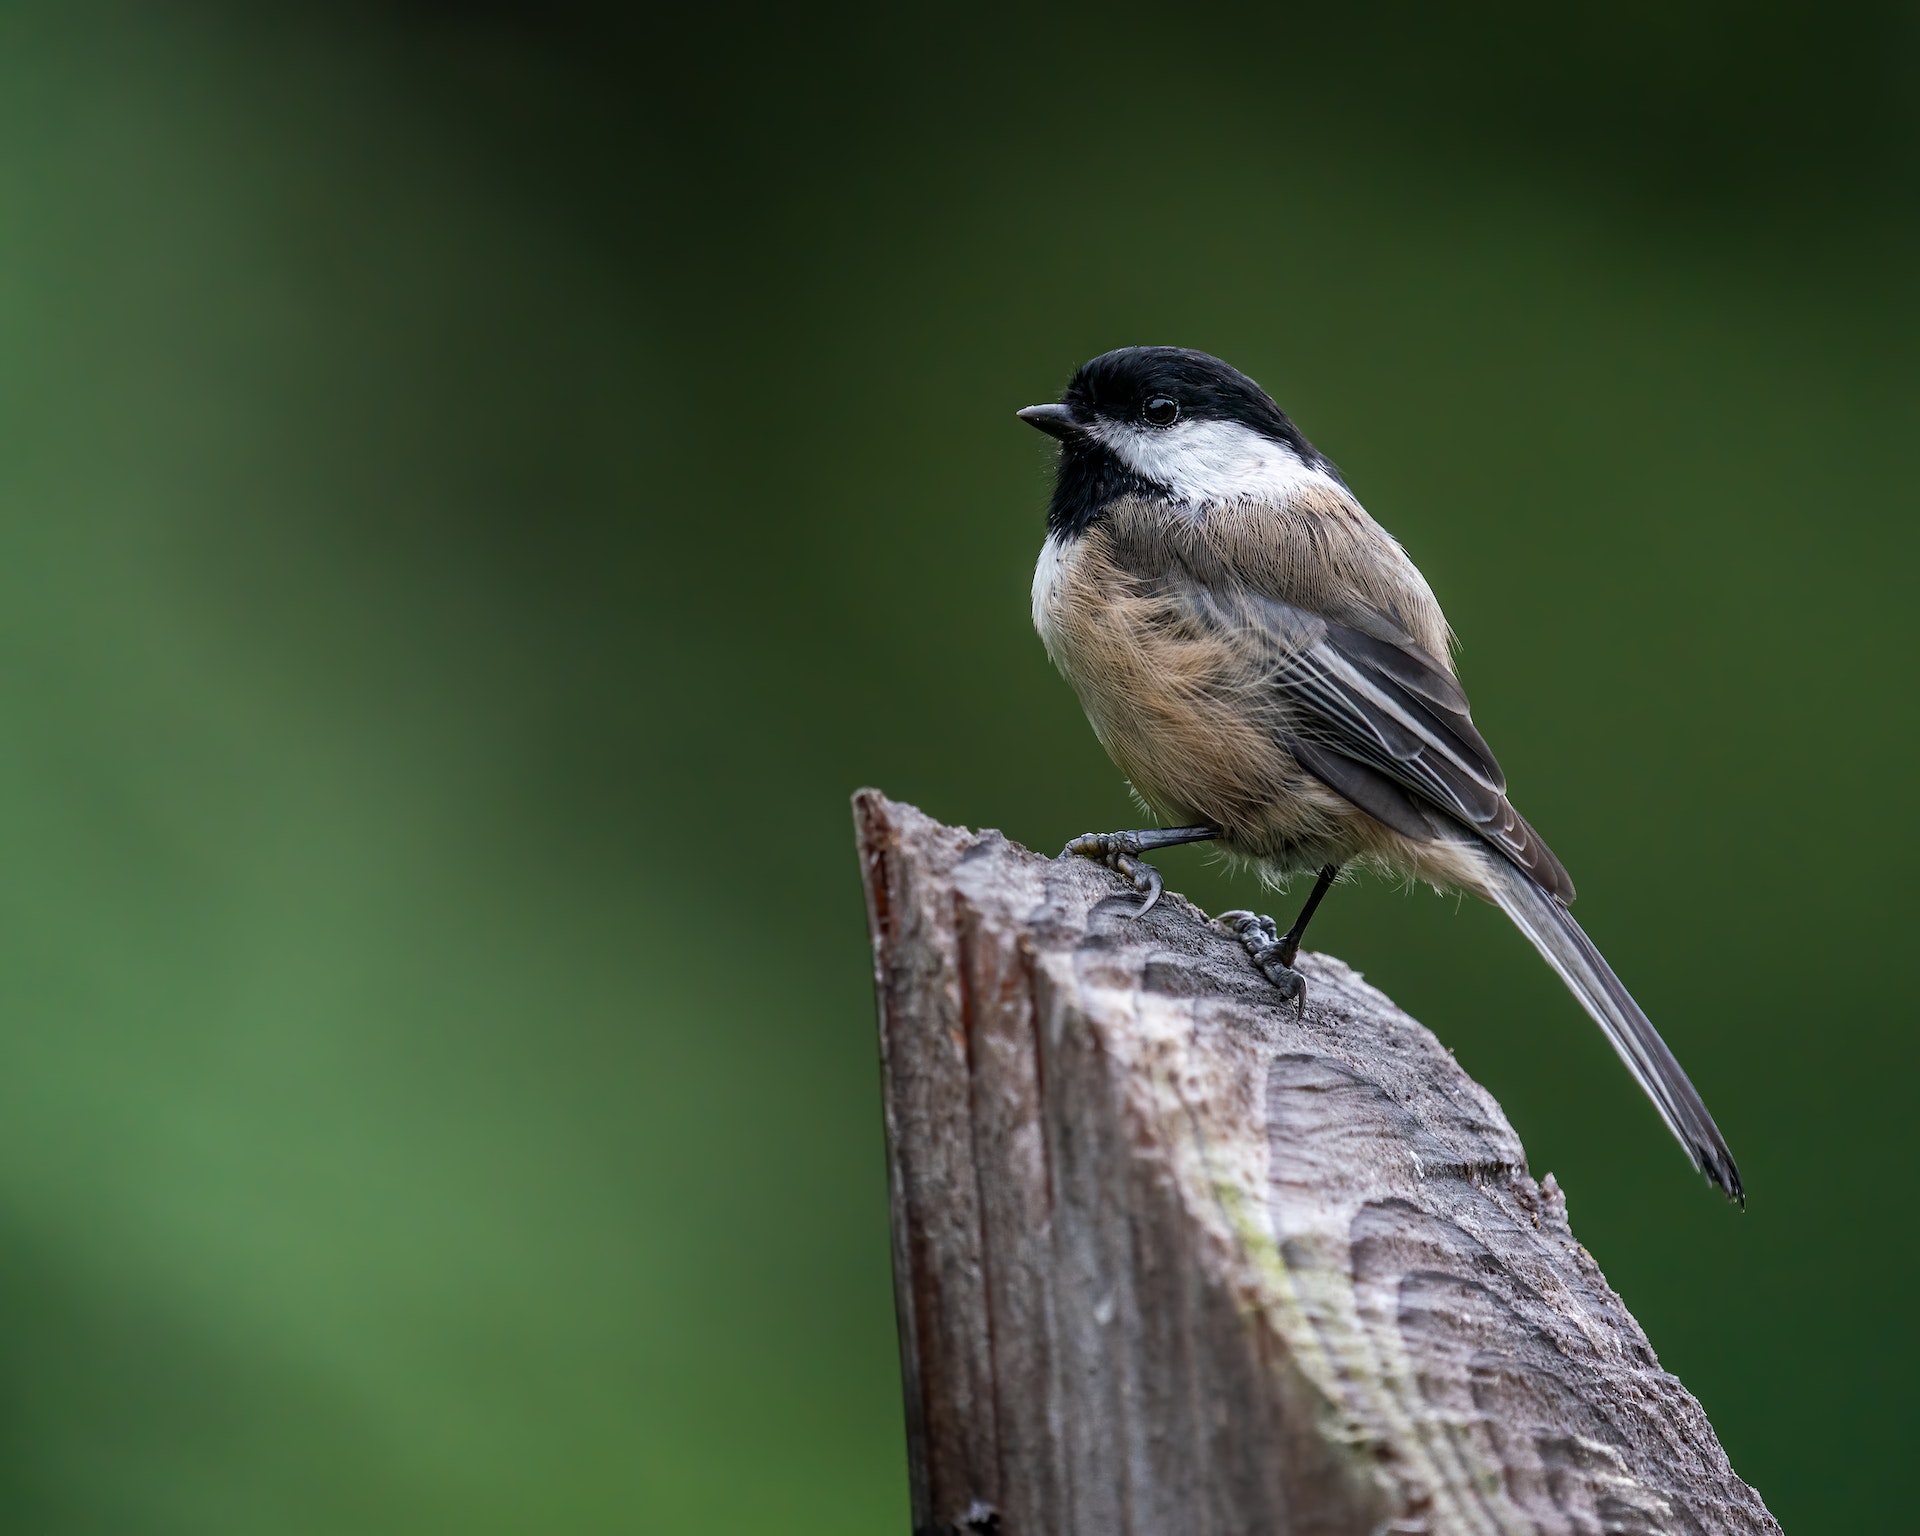 a black capped chickadee perched on a wooden post with green blurred background